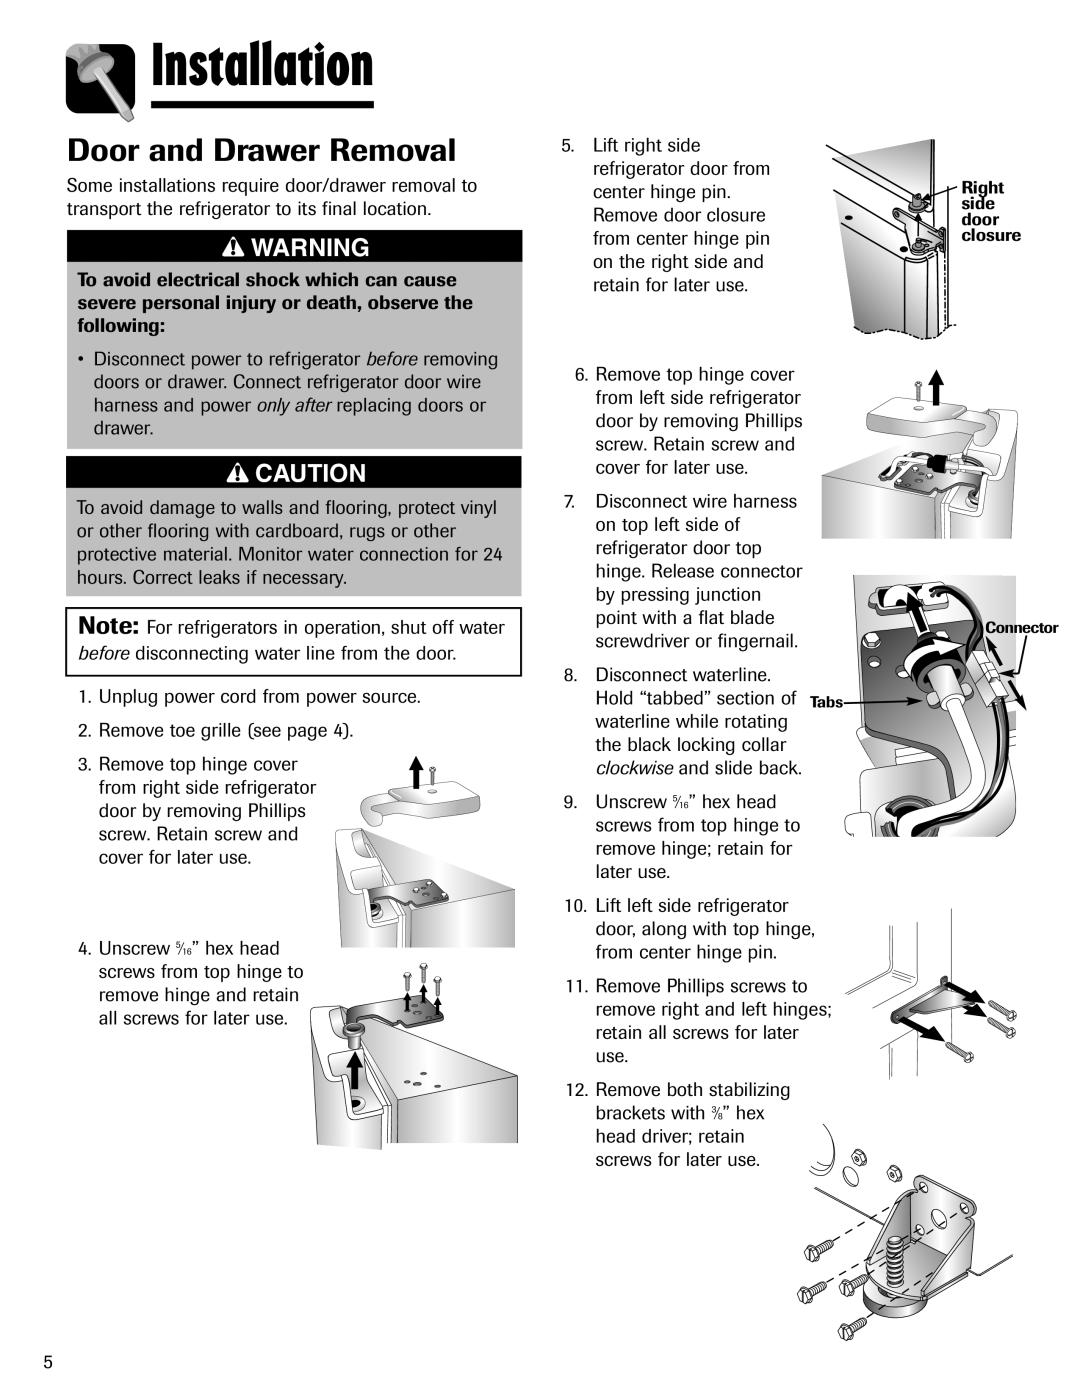 Maytag MFI2266AEW important safety instructions Door and Drawer Removal, Installation 